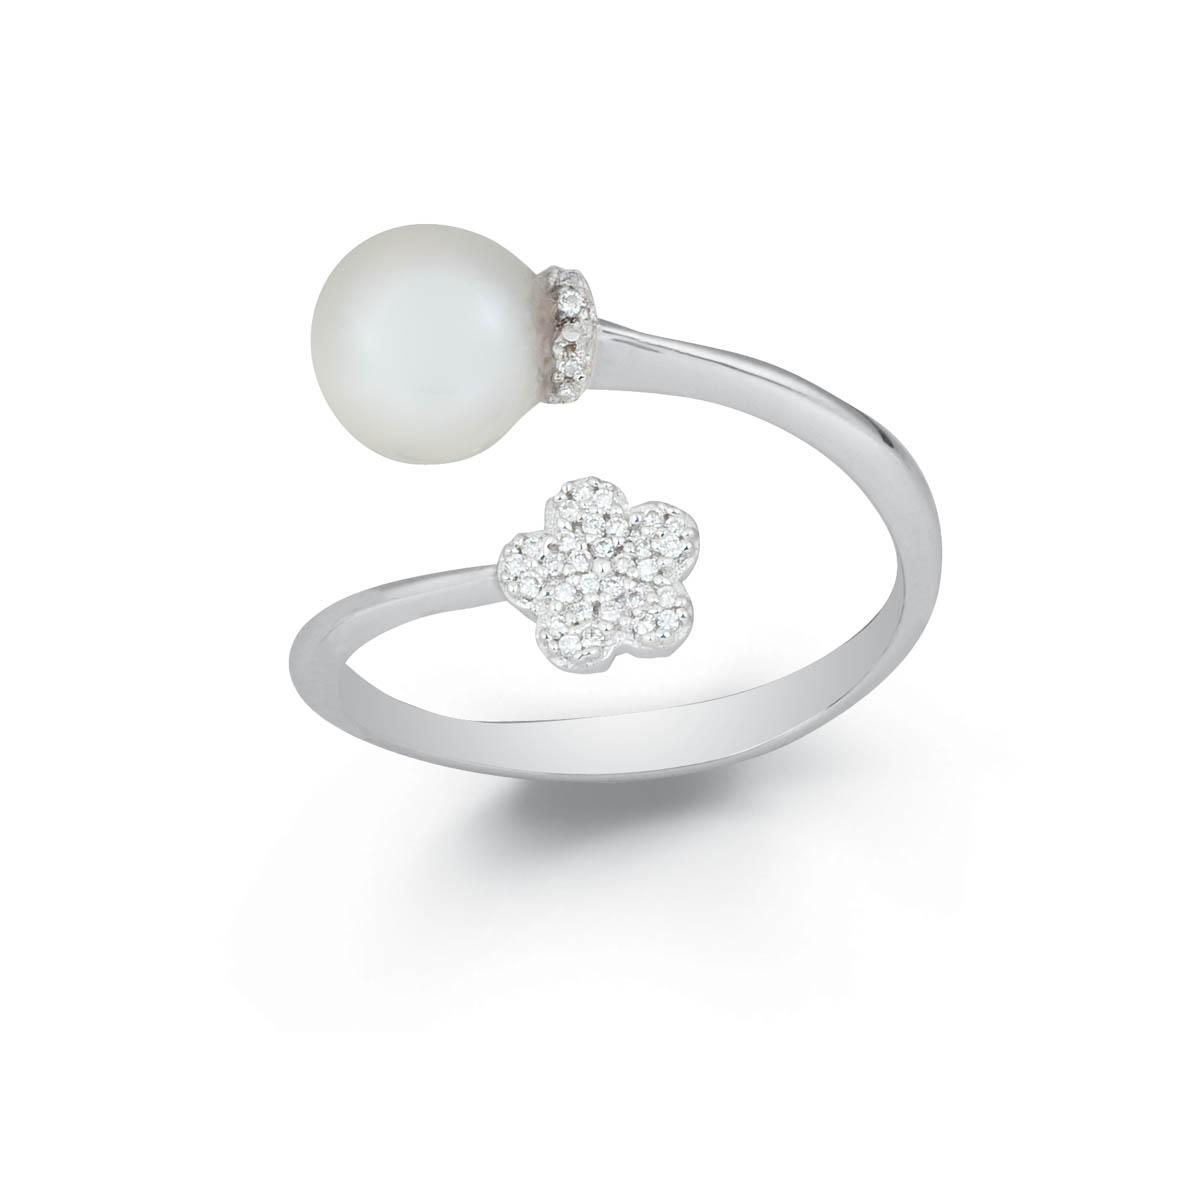 Contrariè ring in 18 kt white gold with diamond pavé flower and sea pearl 7-7.50 mm - AD718-4B